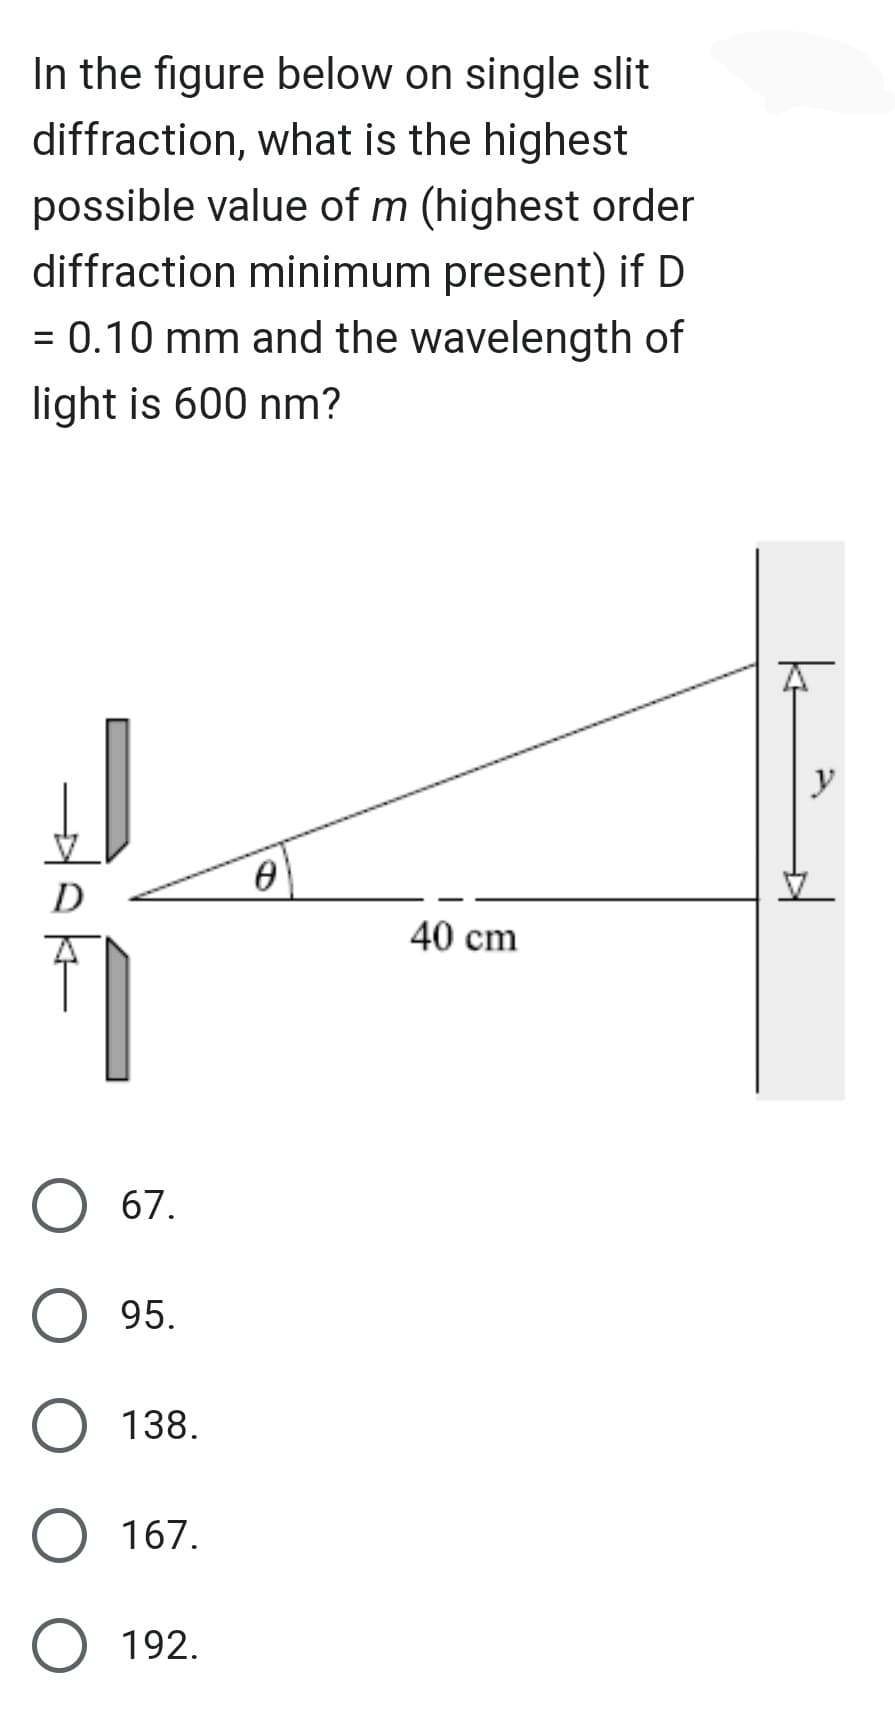 In the figure below on single slit
diffraction, what is the highest
possible value of m (highest order
diffraction minimum present) if D
= 0.10 mm and the wavelength of
light is 600 nm?
D
1
67.
95.
O 138.
167.
O 192.
0
40 cm
y